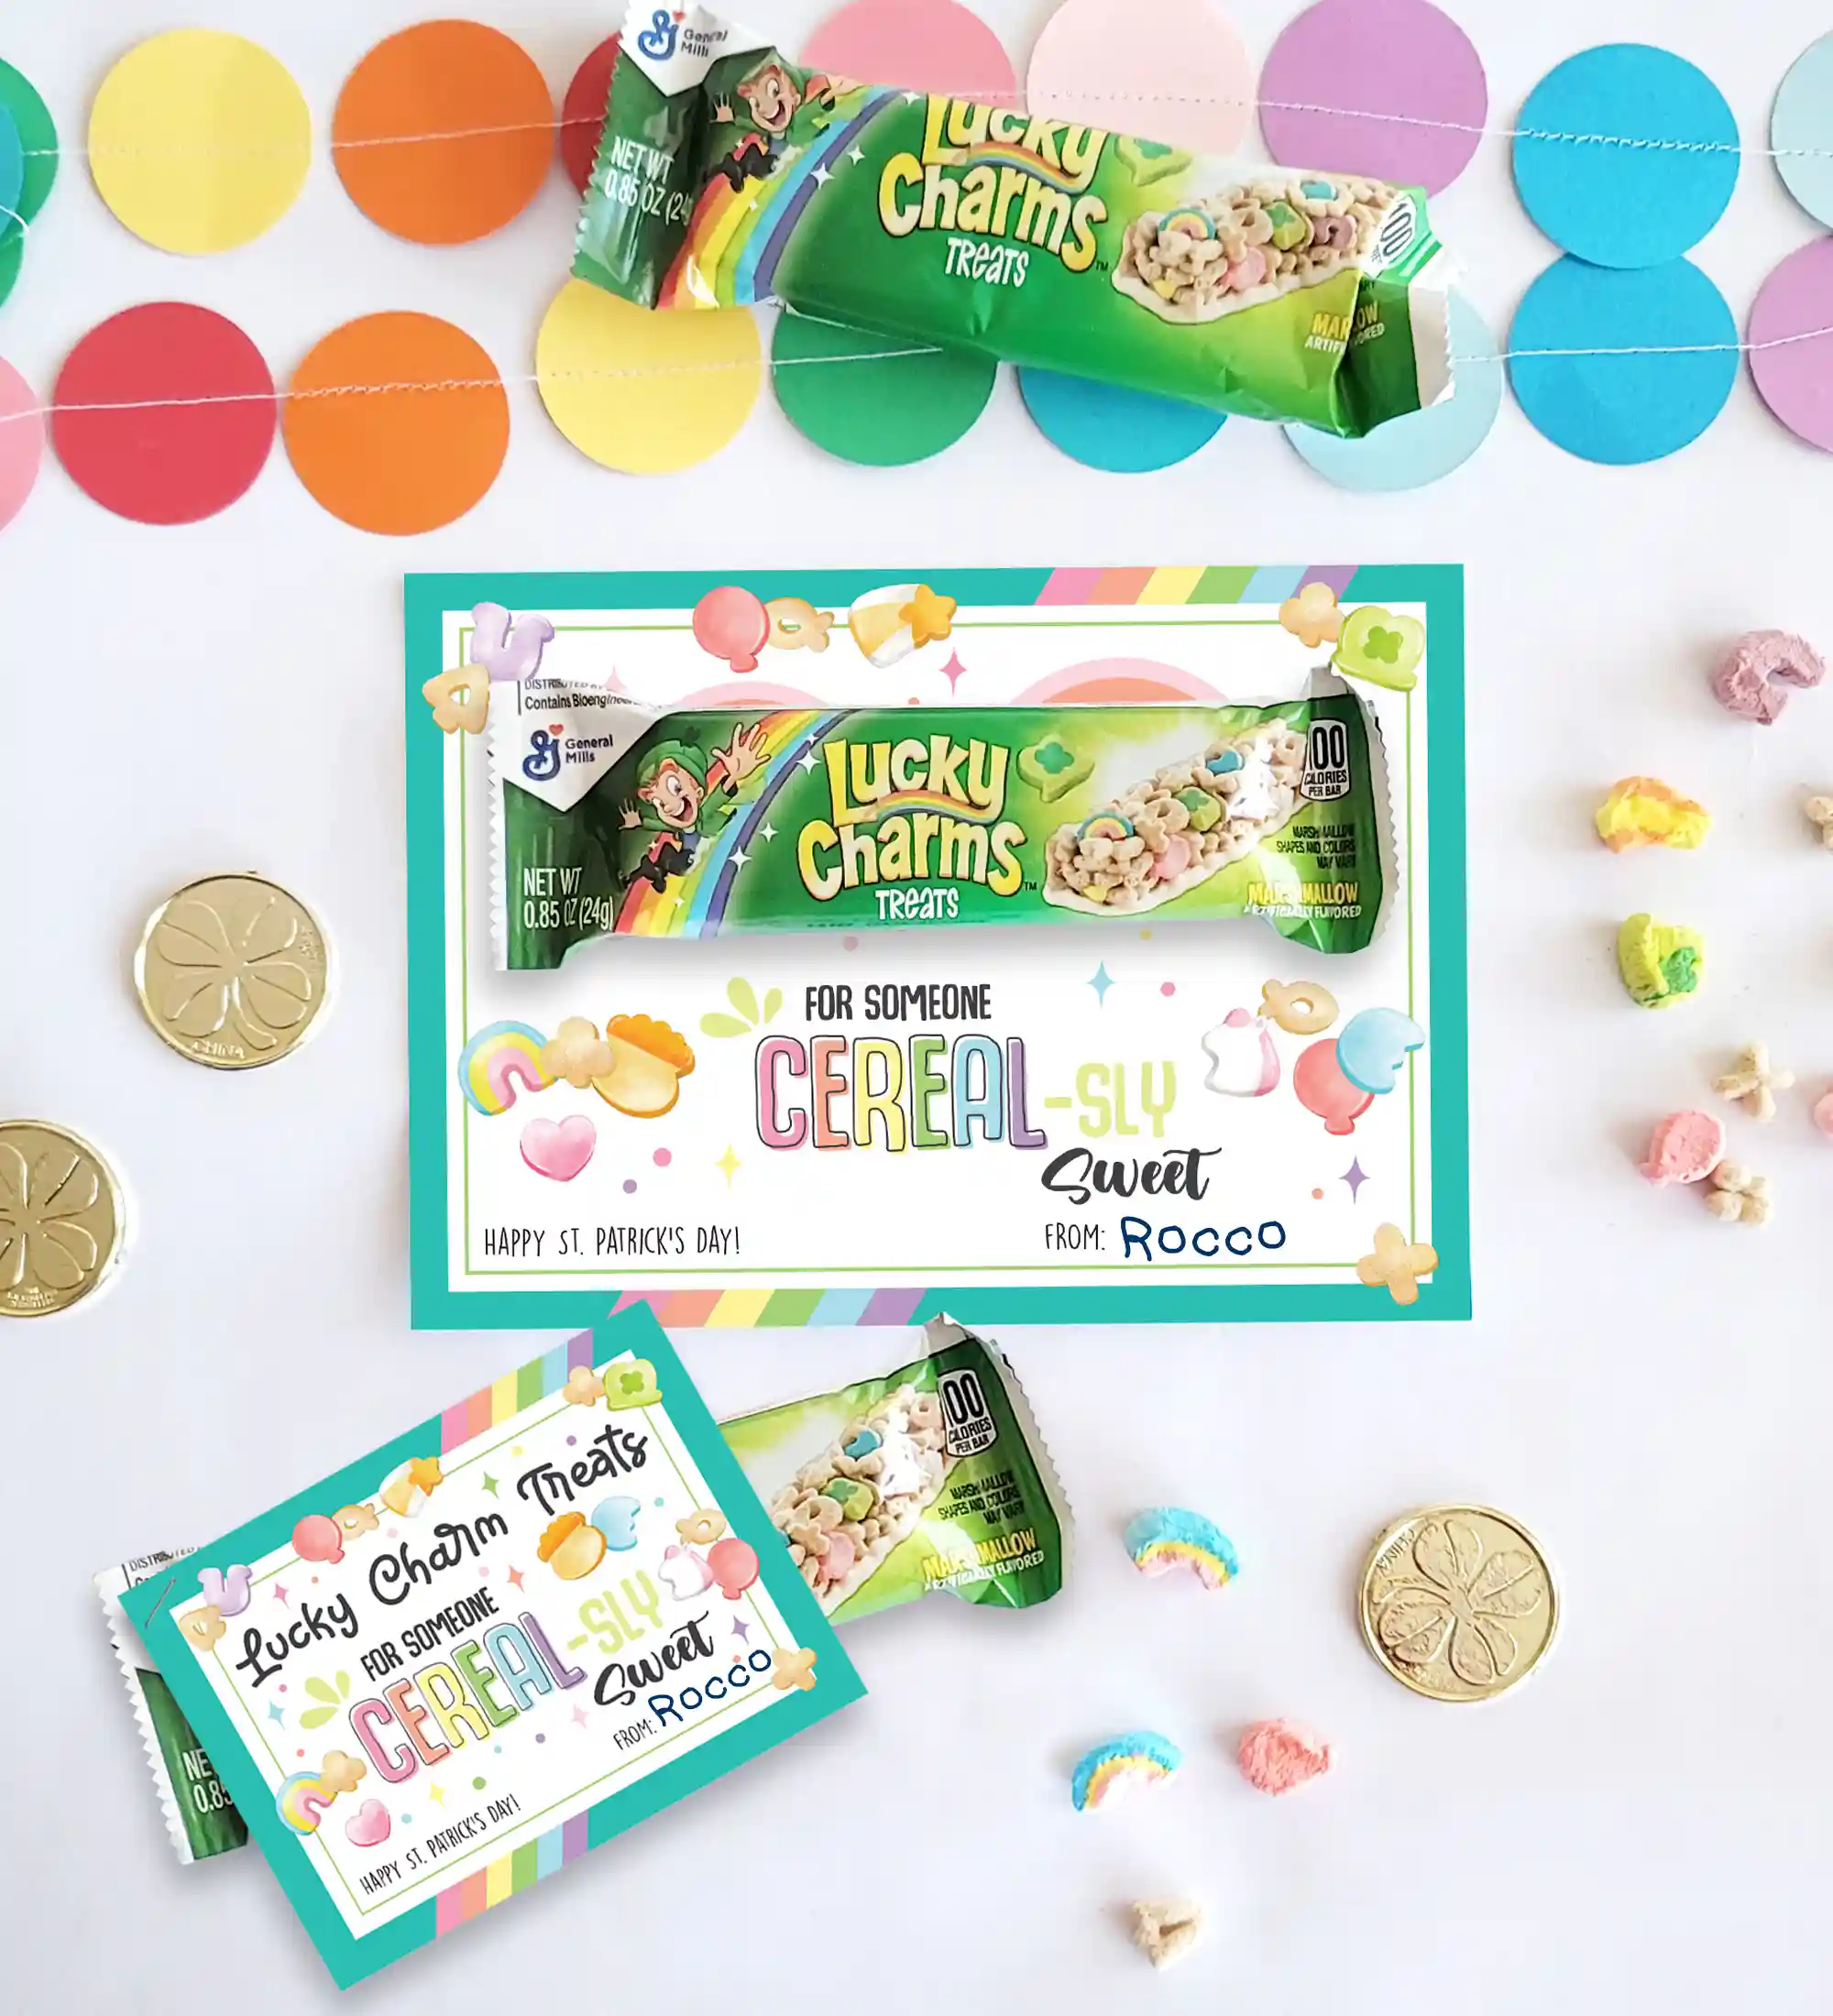 Printable St. Patrick's Day gift tag for a fun and easy gift for St. Patrick's Day. Gfit tag says: "For someone CEREAL-sly sweet. Happy St. Patrick's Day!" Attach gift tag to a box of Lucky Charms, a St. Patrick's Day themed treat like a Lucky Charms treat bar, or a small toy!